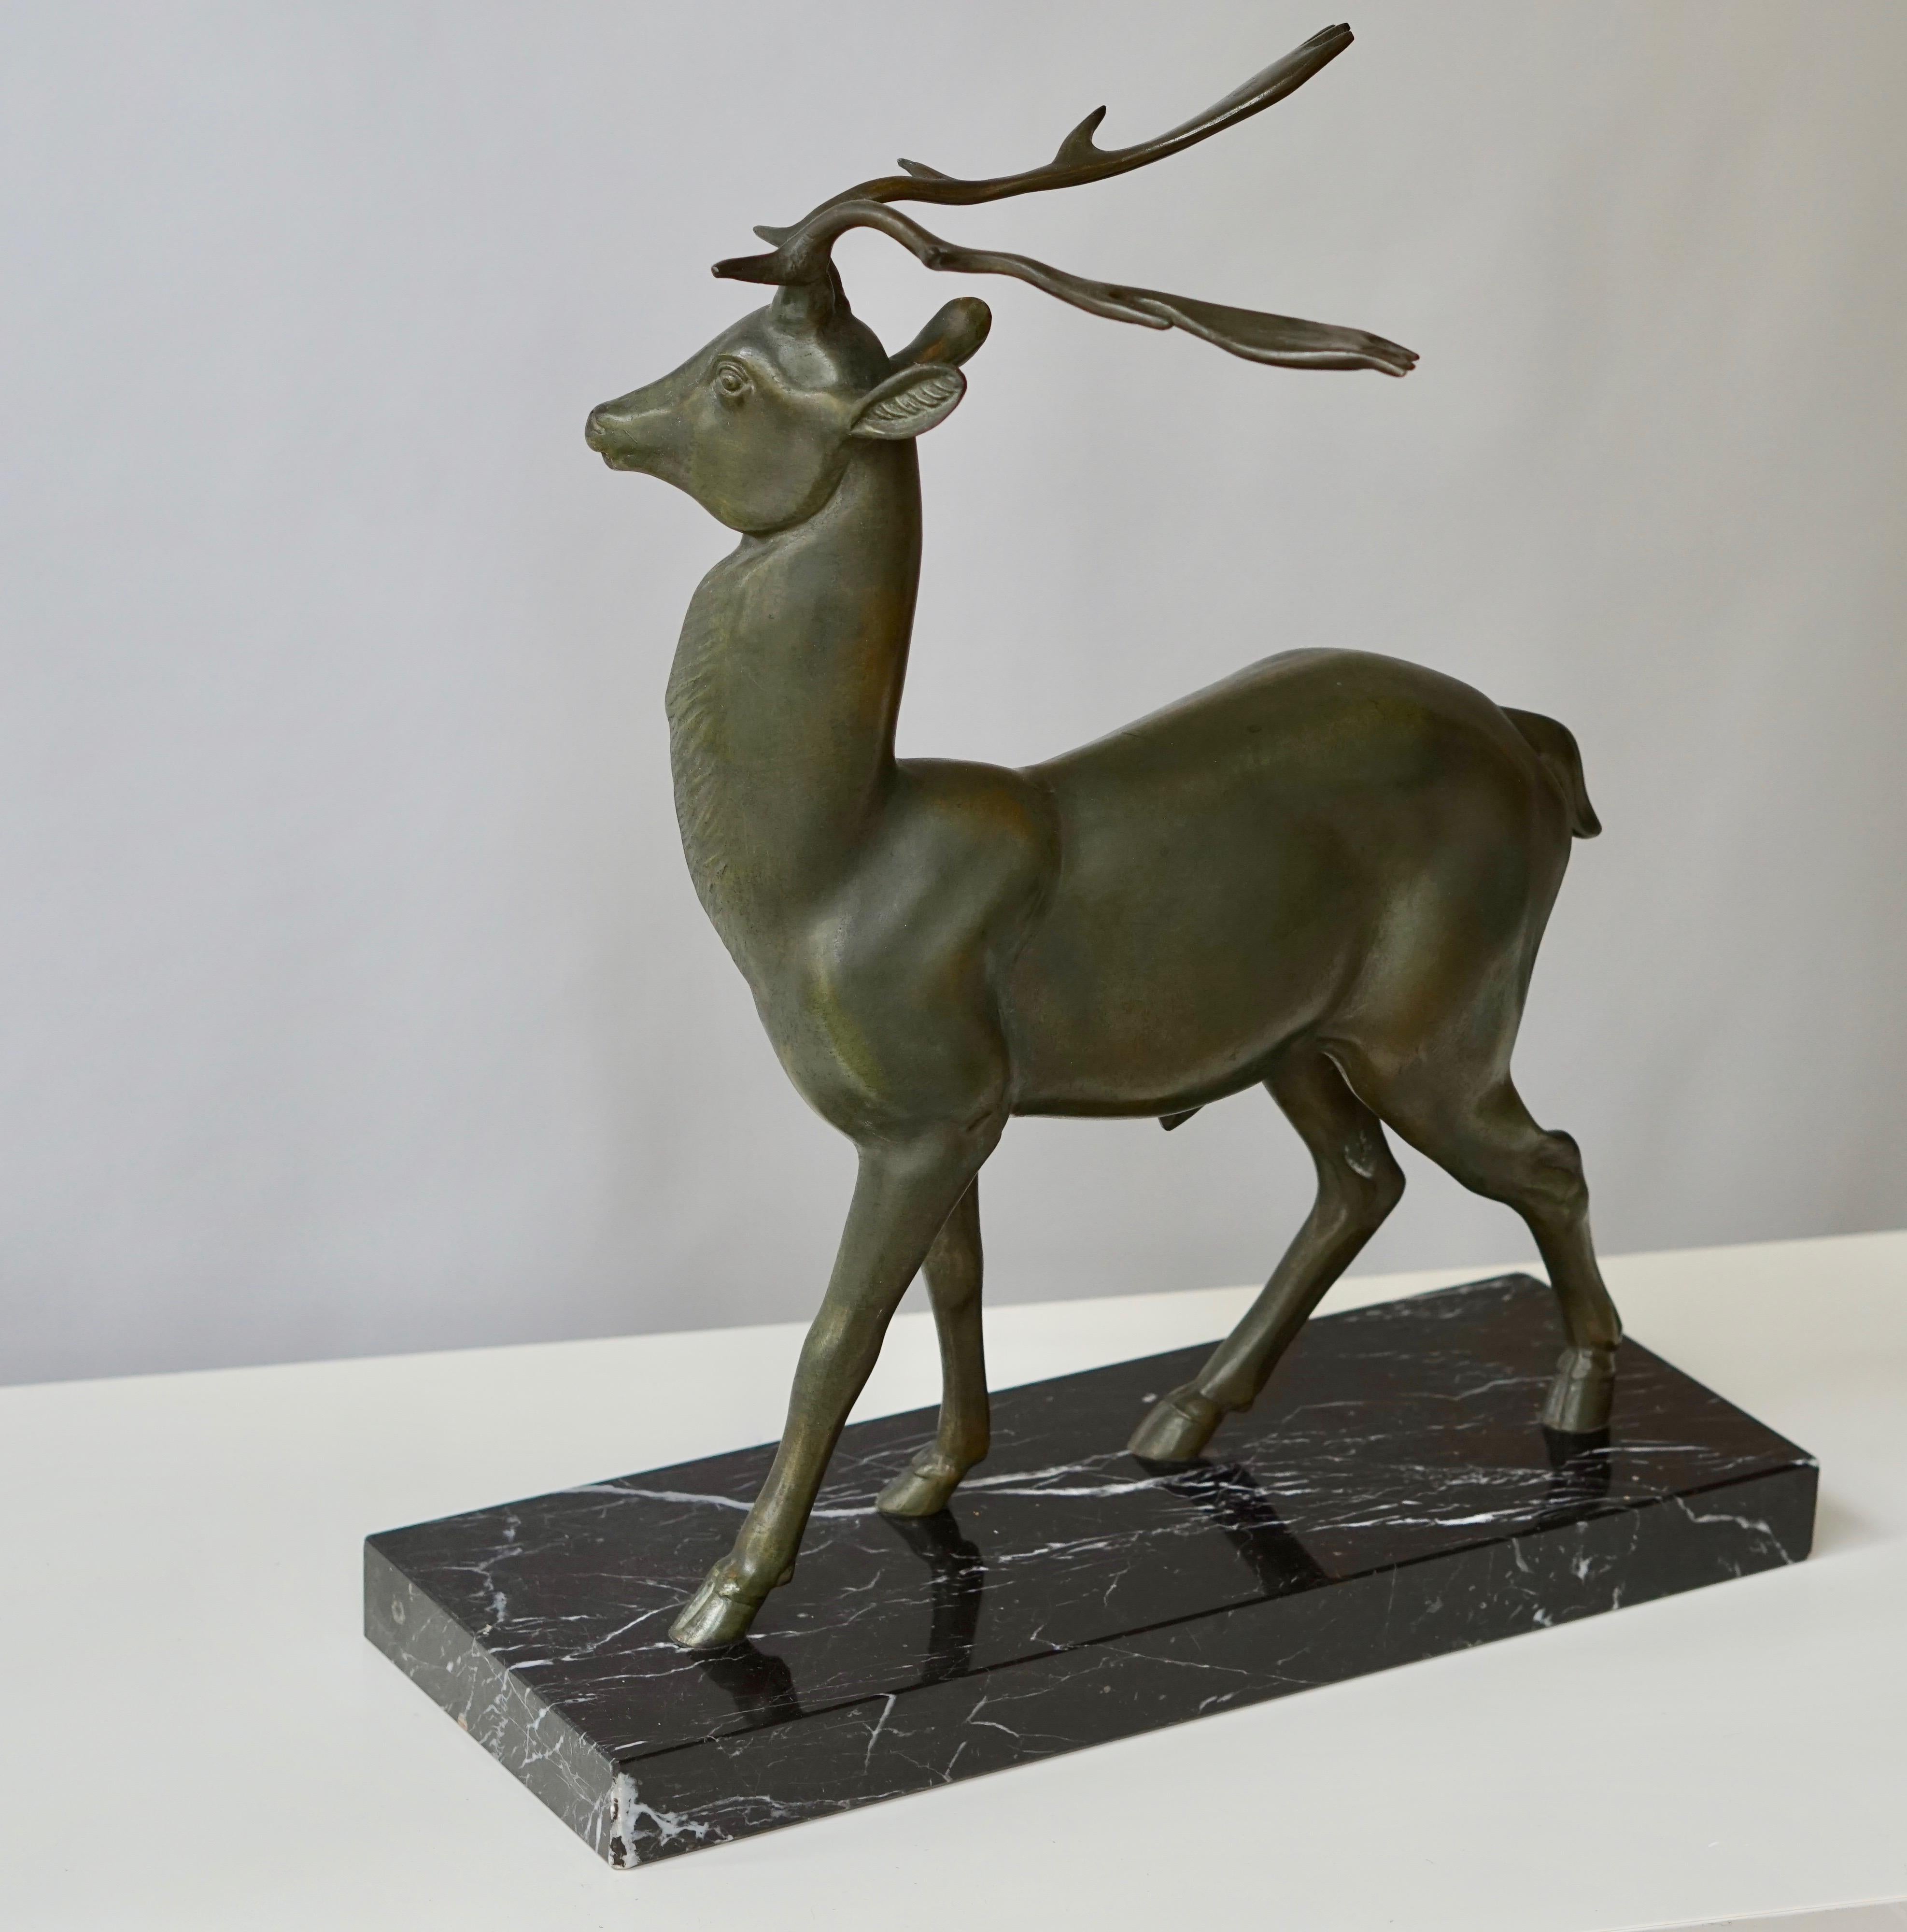 Patinated sculpture of a deer on a marble base.
Height 44 cm.
Width 37 cm.
Depth 20 cm.
Weight 7 kg.